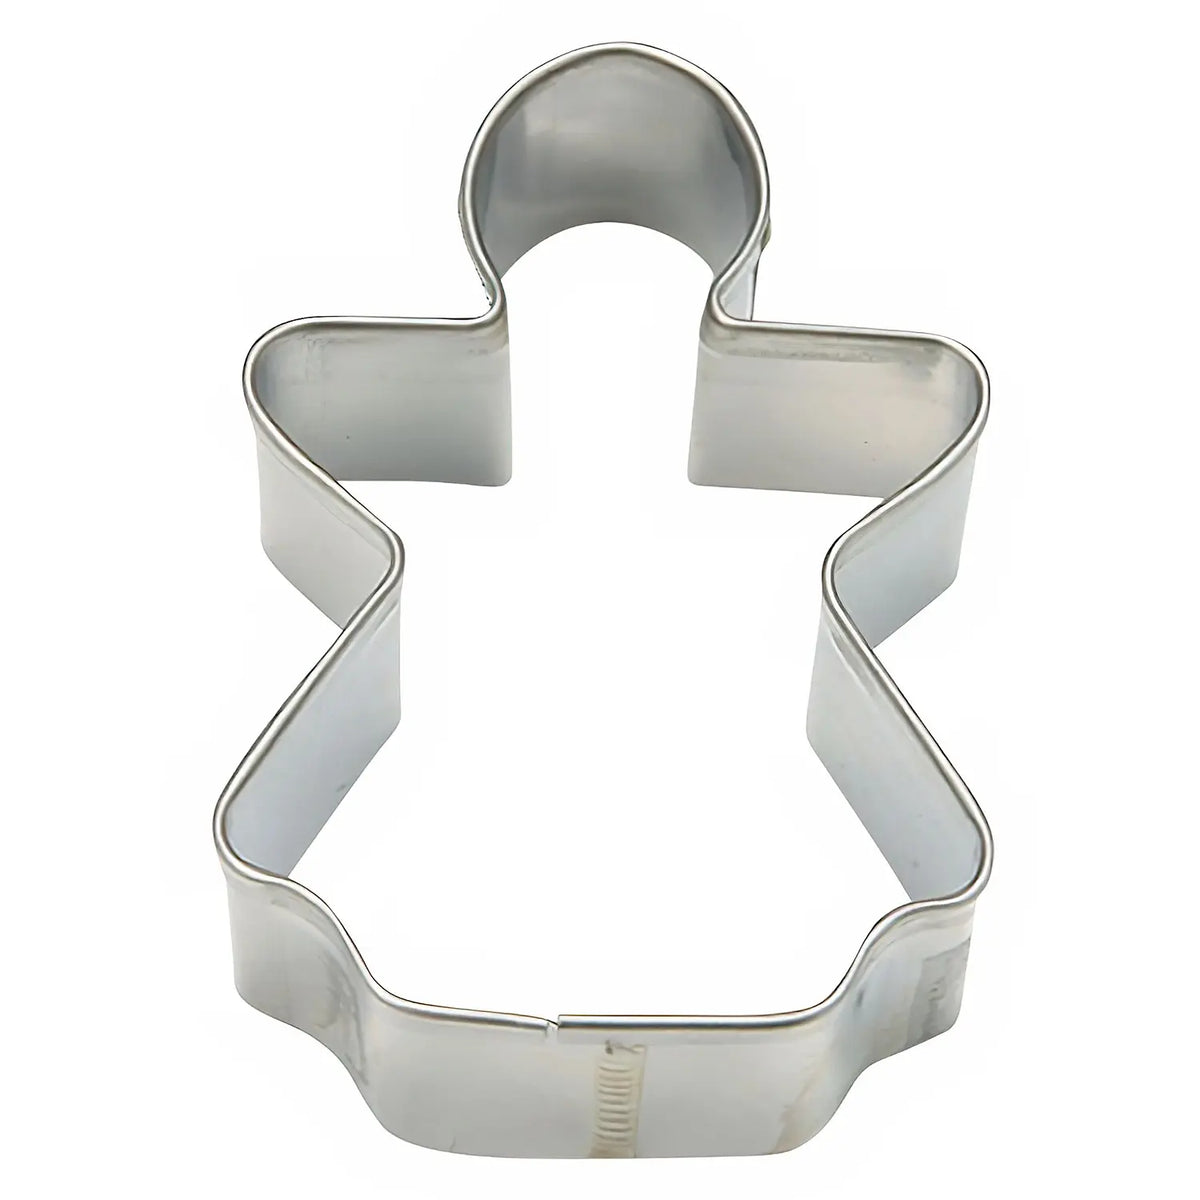 TIGERCROWN Cake Land Stainless Steel Cookie Cutter Gingerbread Woman